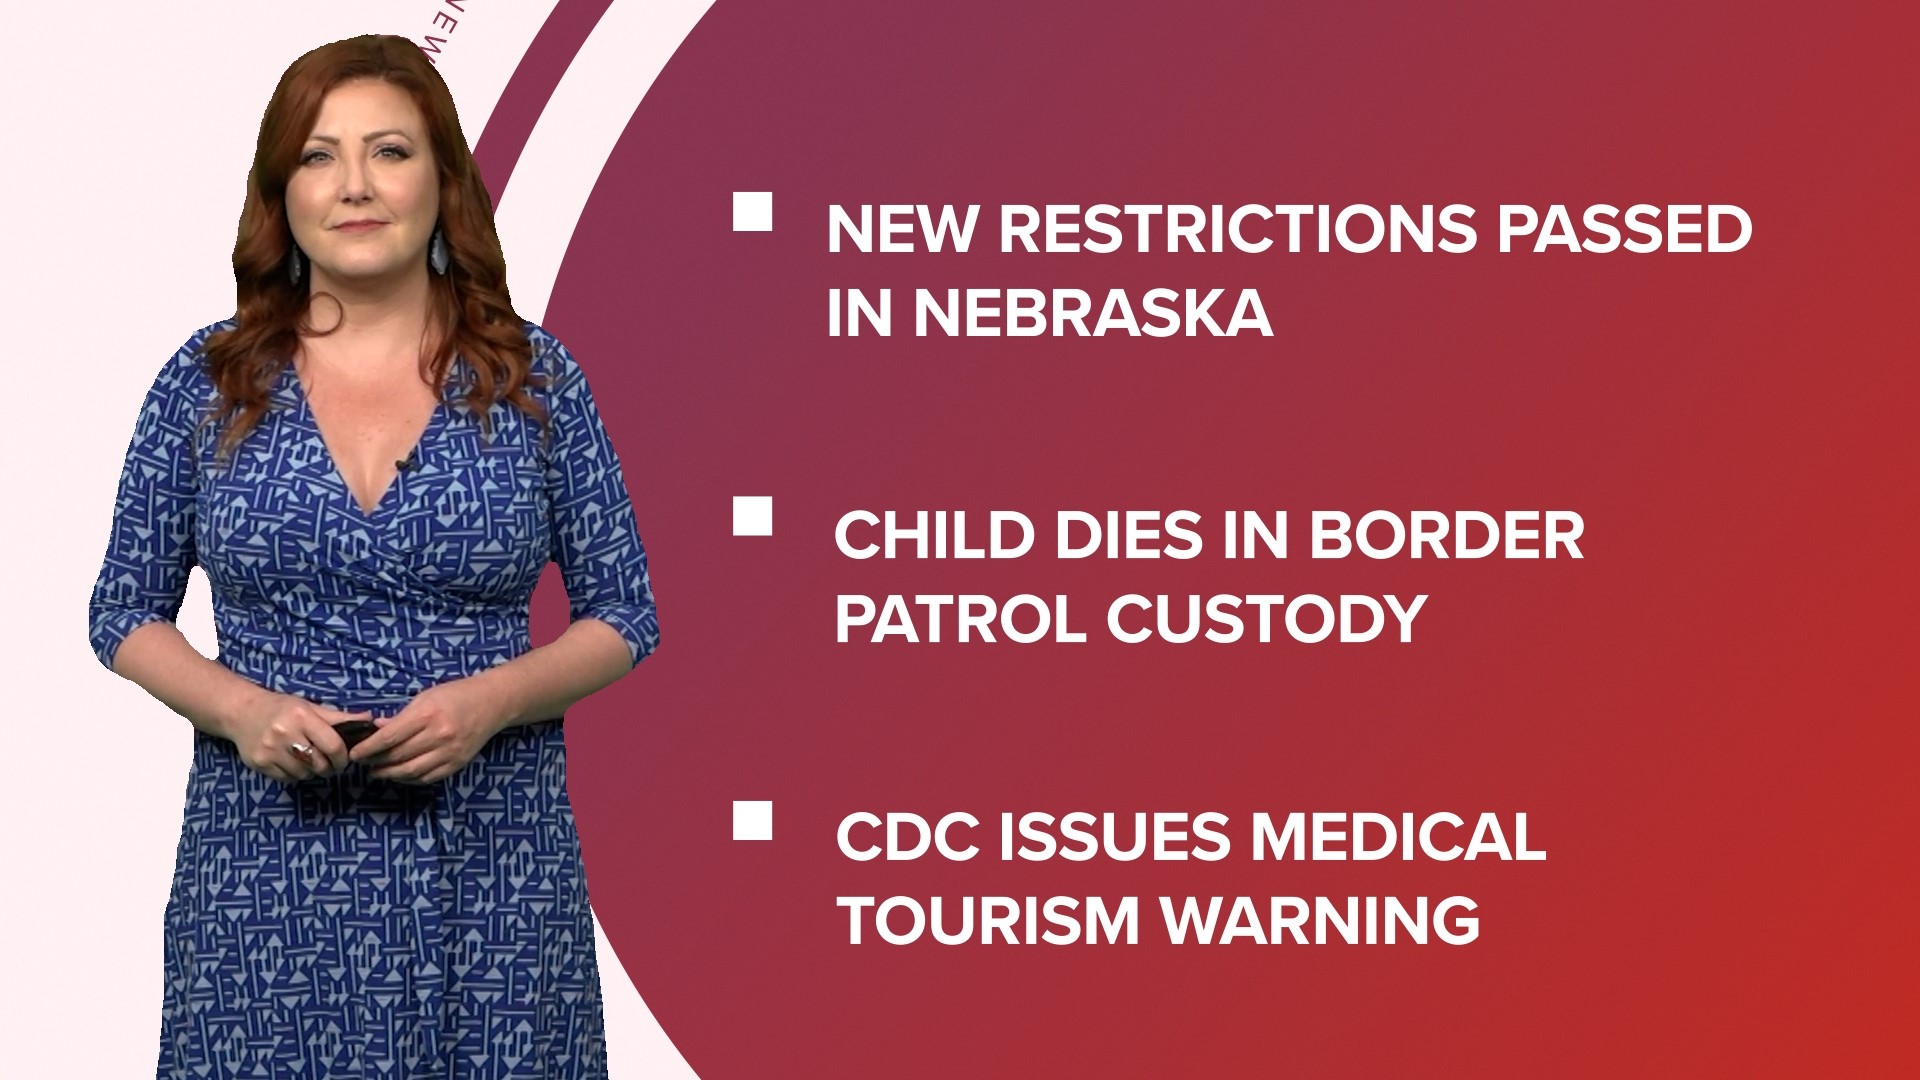 A look at what is happening in the news from Nebraska passing bans on abortion and gender-affirming care to a CDC warning on medical tourism and a new SpaceX launch.